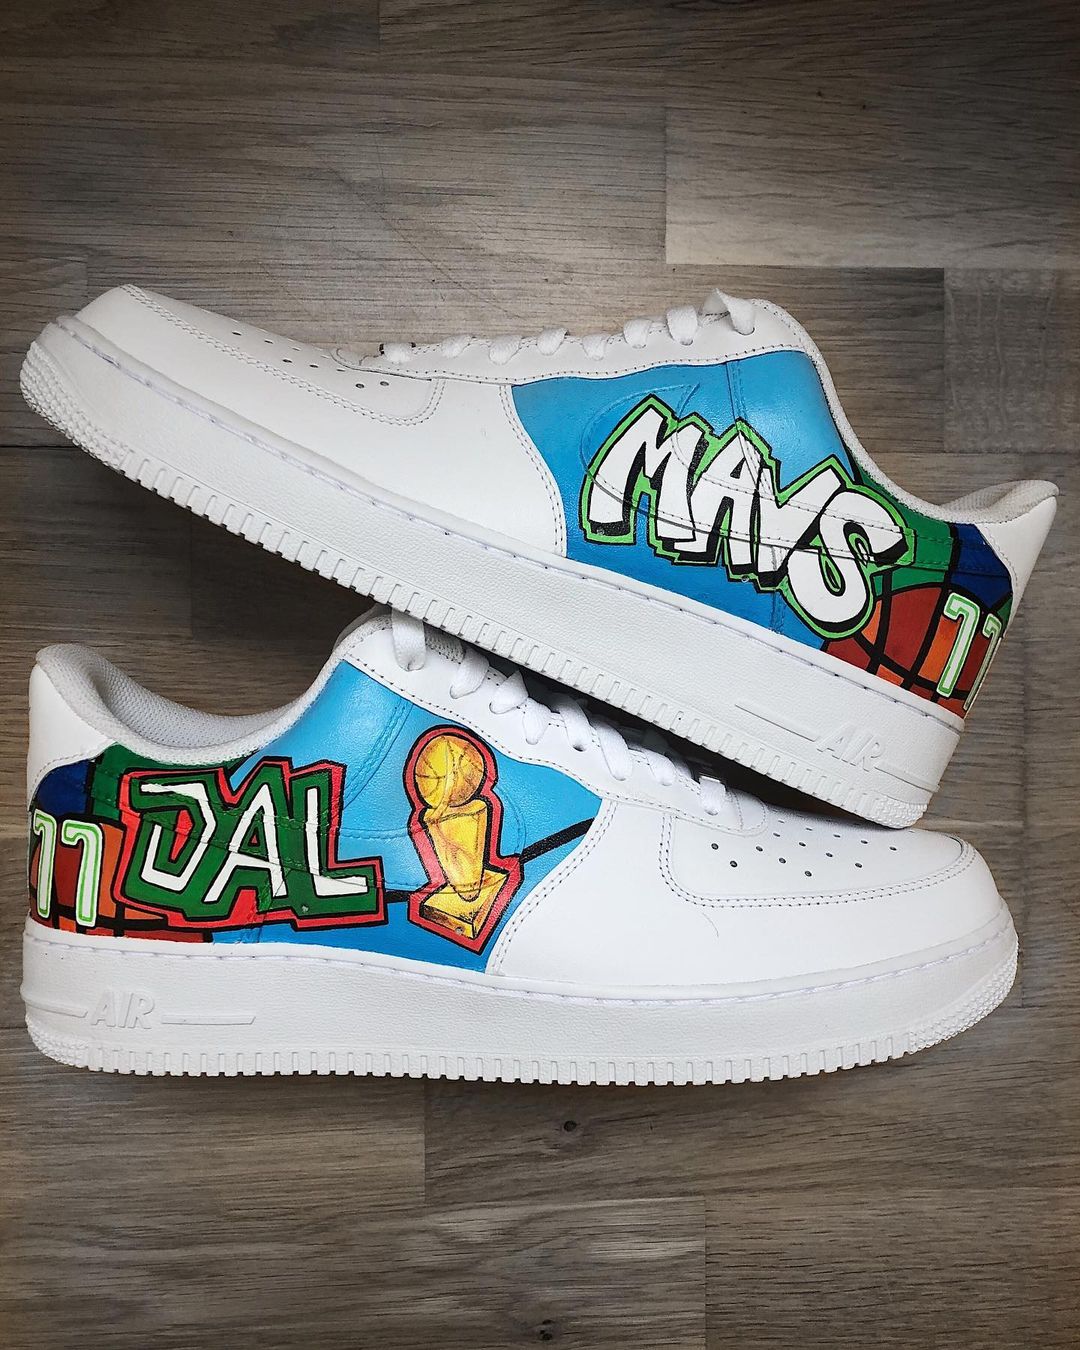 KarlsKicks - Another look at the custom painted lv Air force 1 🔥 Made for  a customer 👍 Online now via karlskicks.com in all sizes #lv #airforce  #nike #custommade #customsneakers #customairforce #louisvuitton